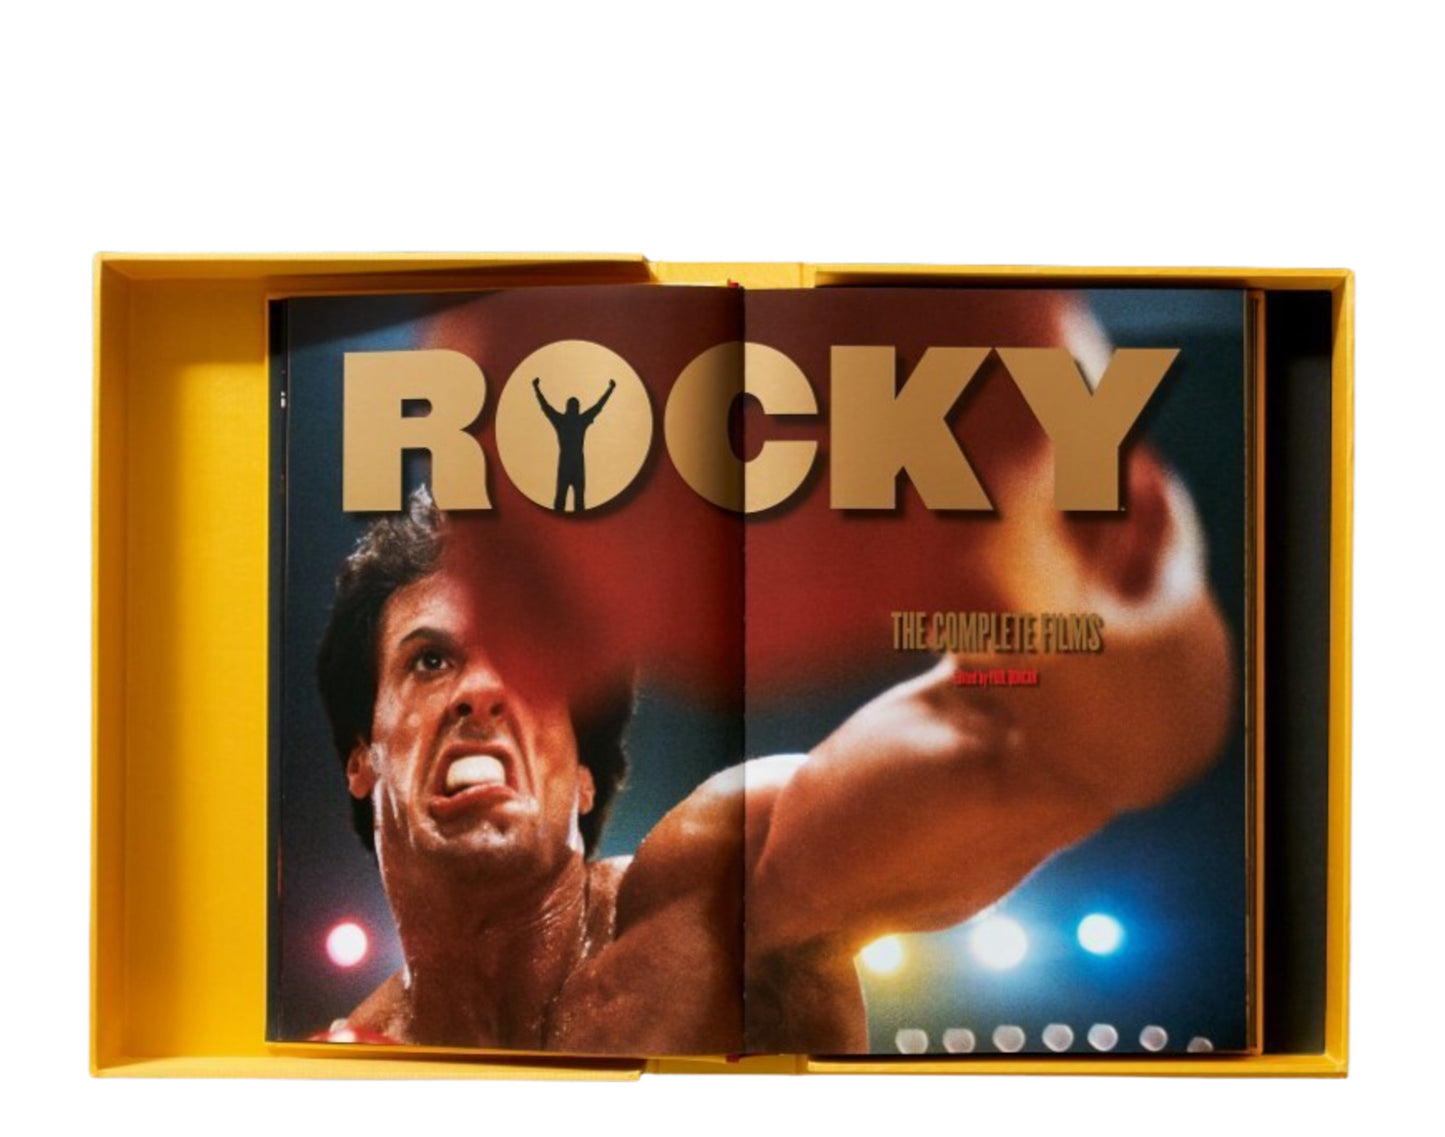 Taschen Books - Rocky. The Complete Films Hardcover Book